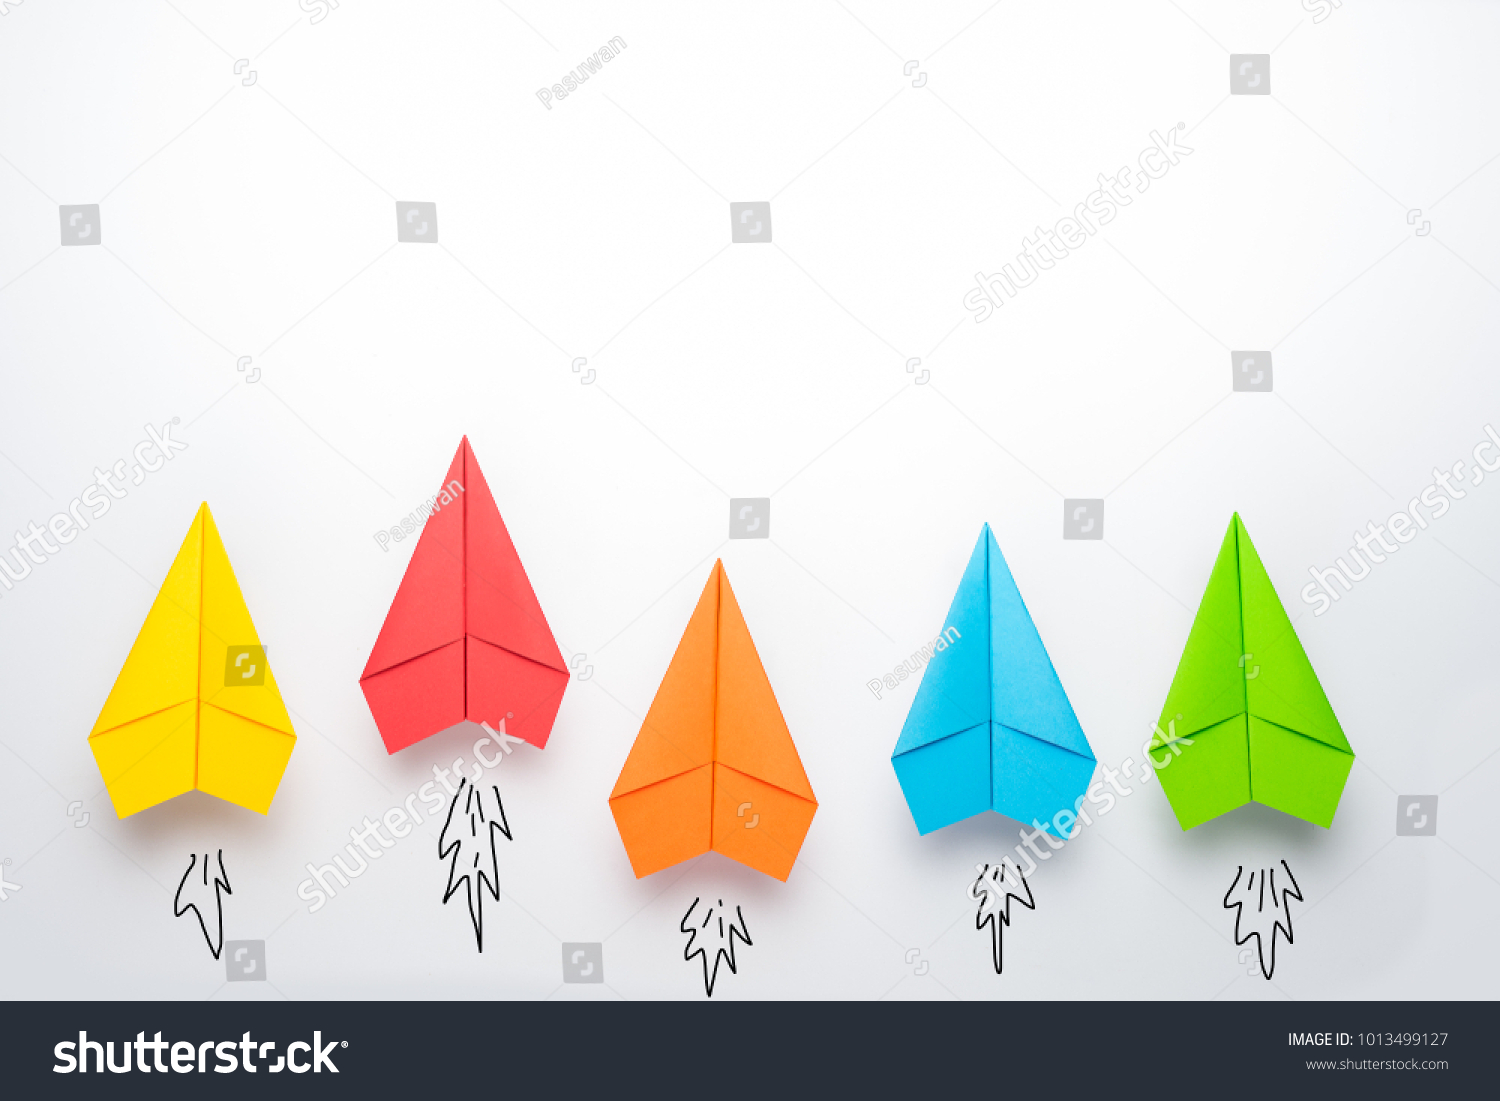 paper plane on white background, Business competition concept. #1013499127